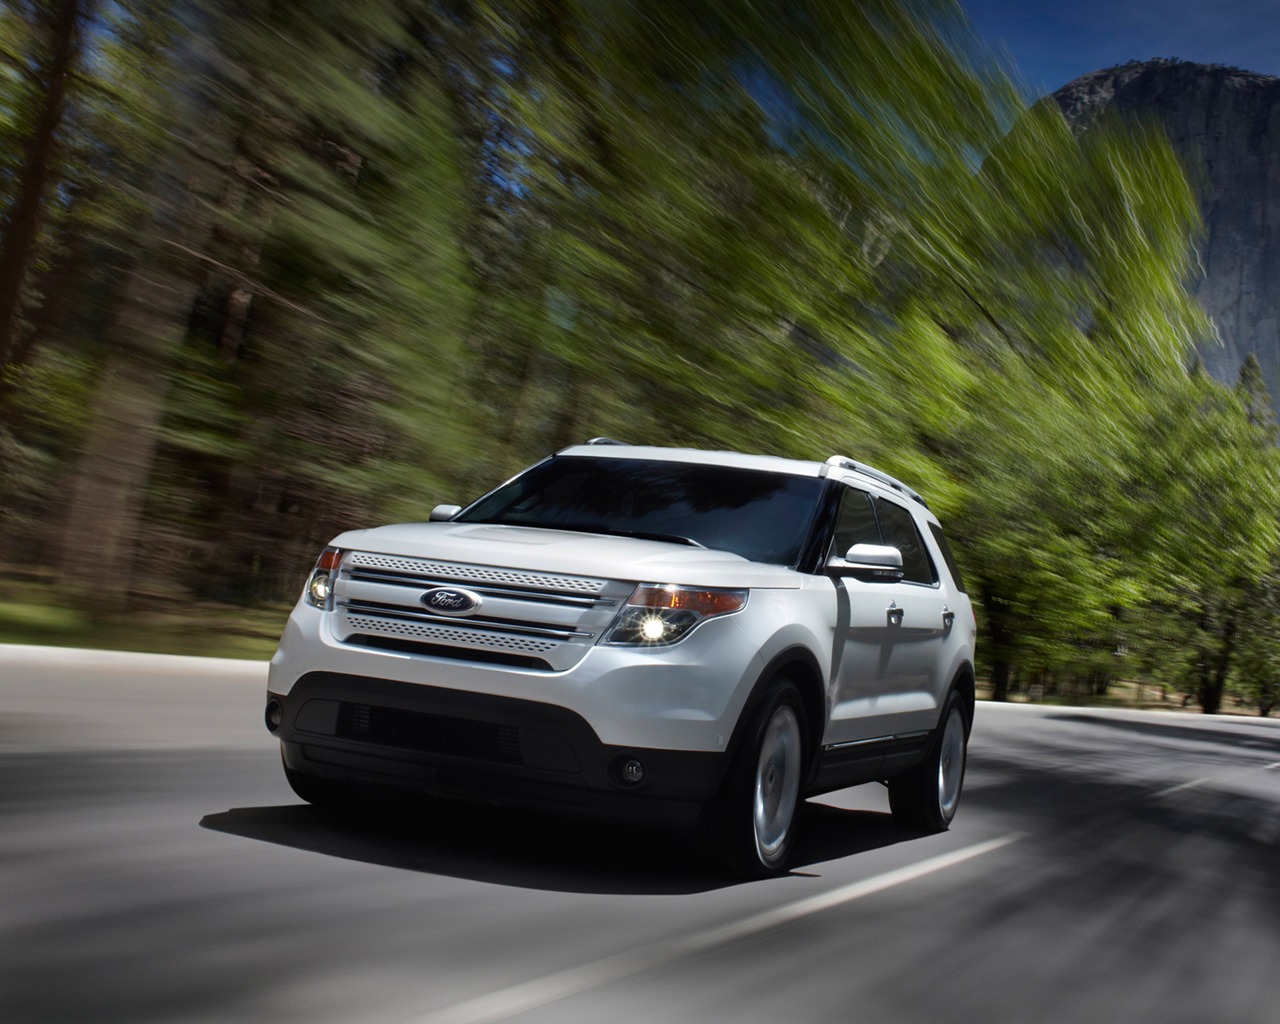 Ford Explorer Limited - 2011 福特 #17 - 1280x1024